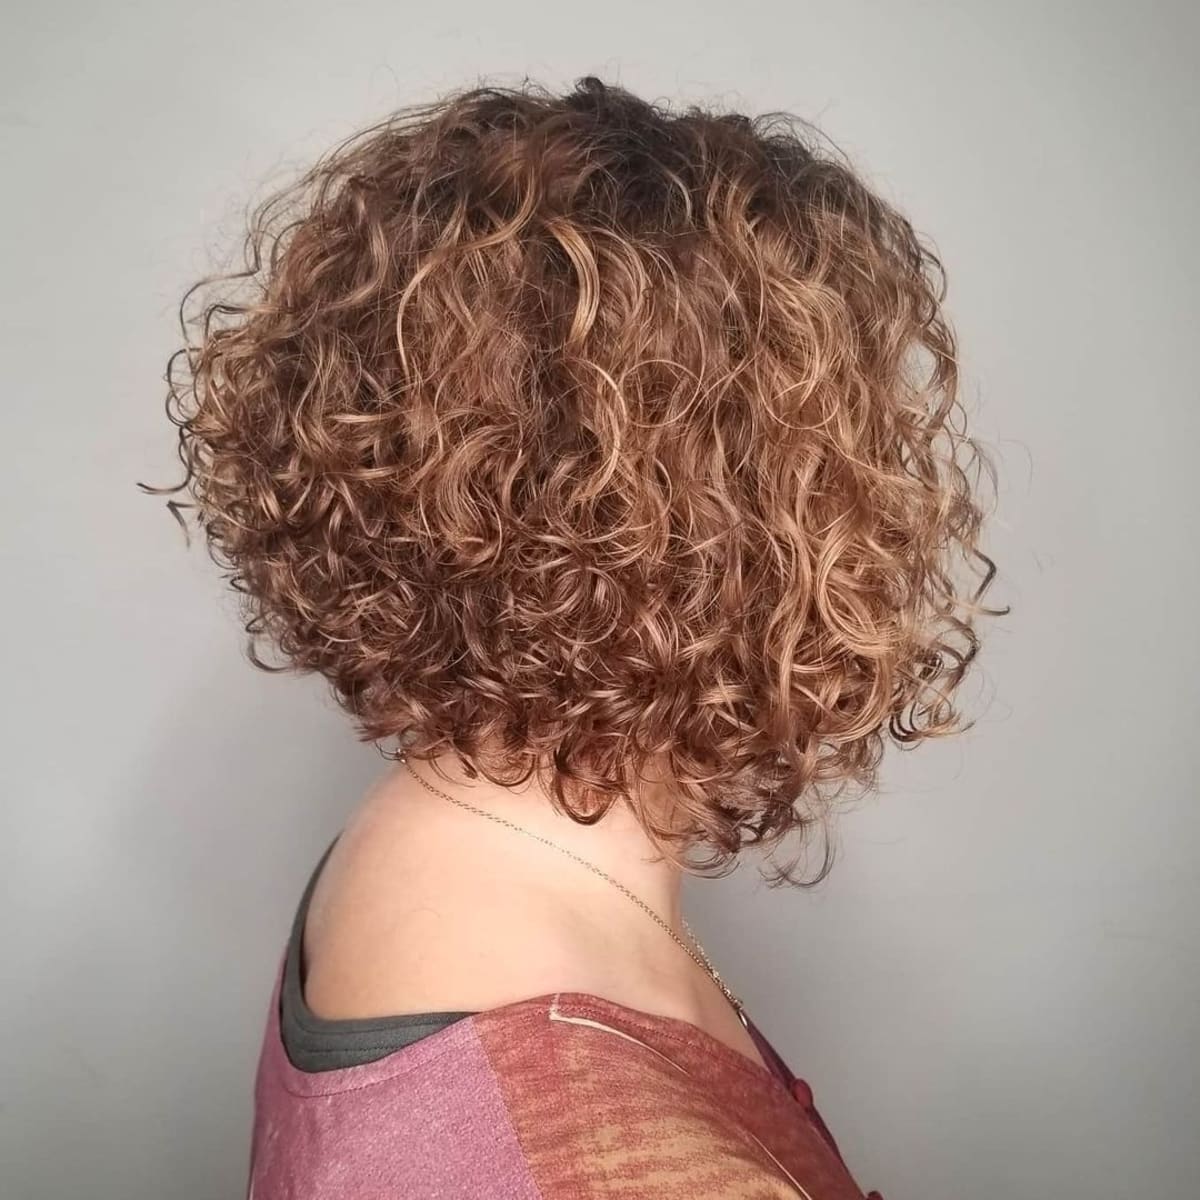 Layered, Stacked Cut for Short Curly Hair